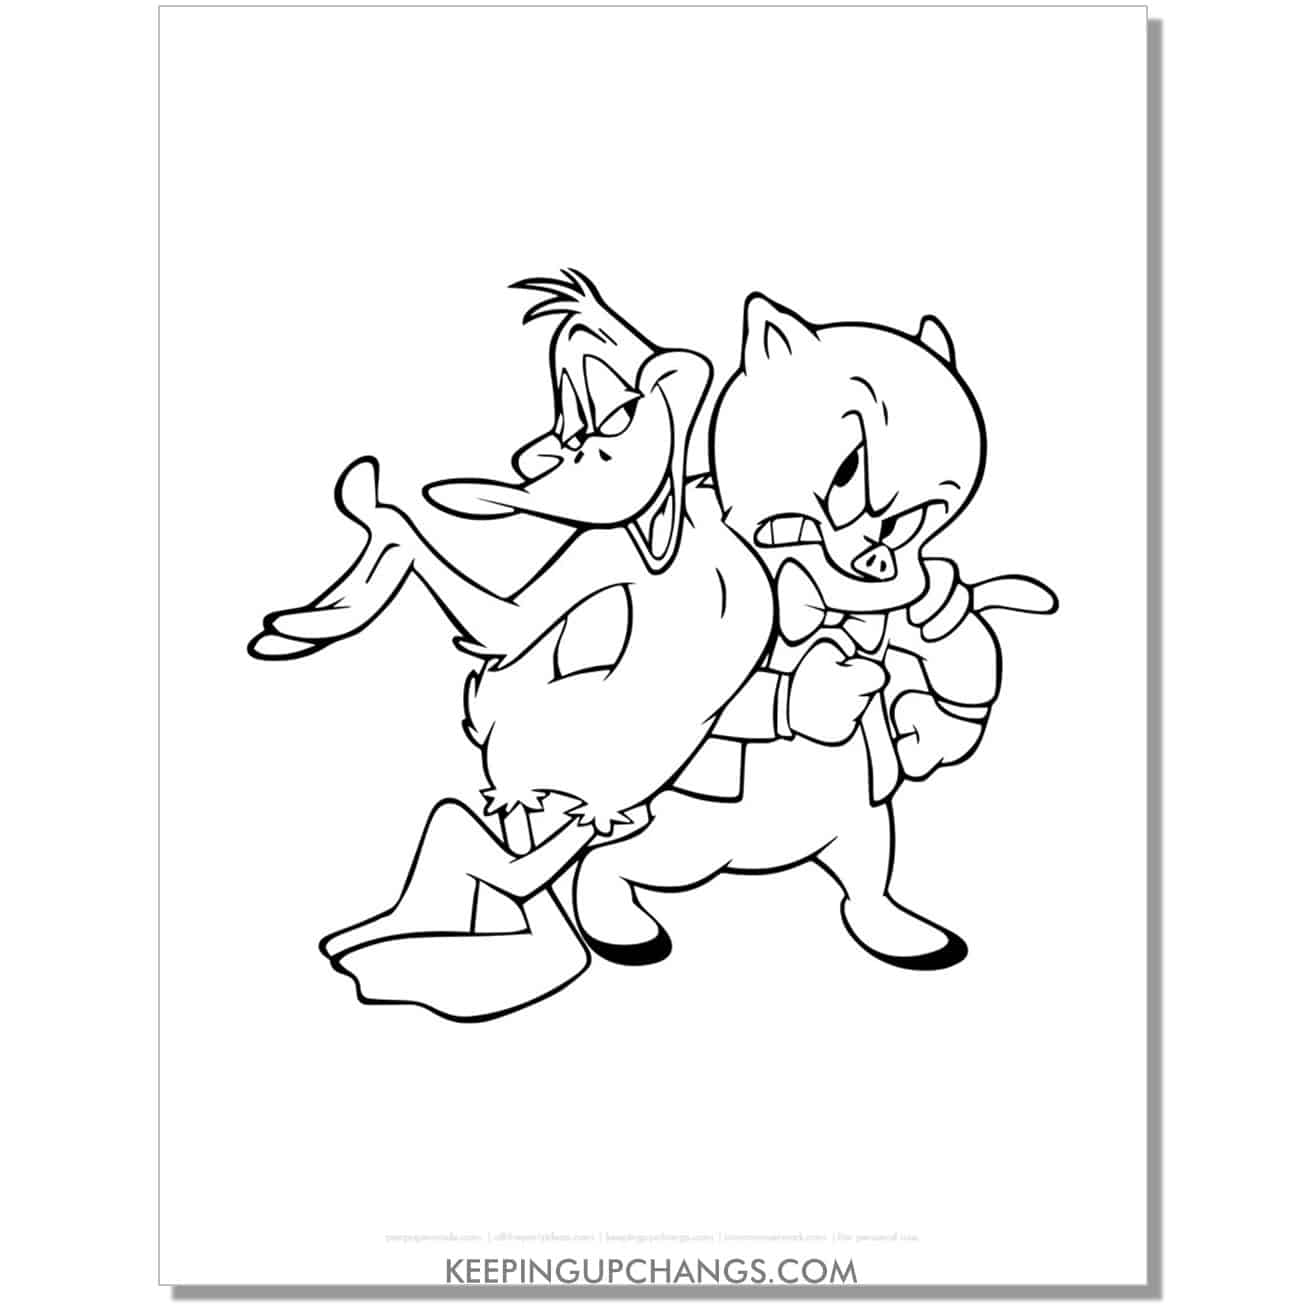 free daffy duck and porky pig looney tunes coloring page, sheet.